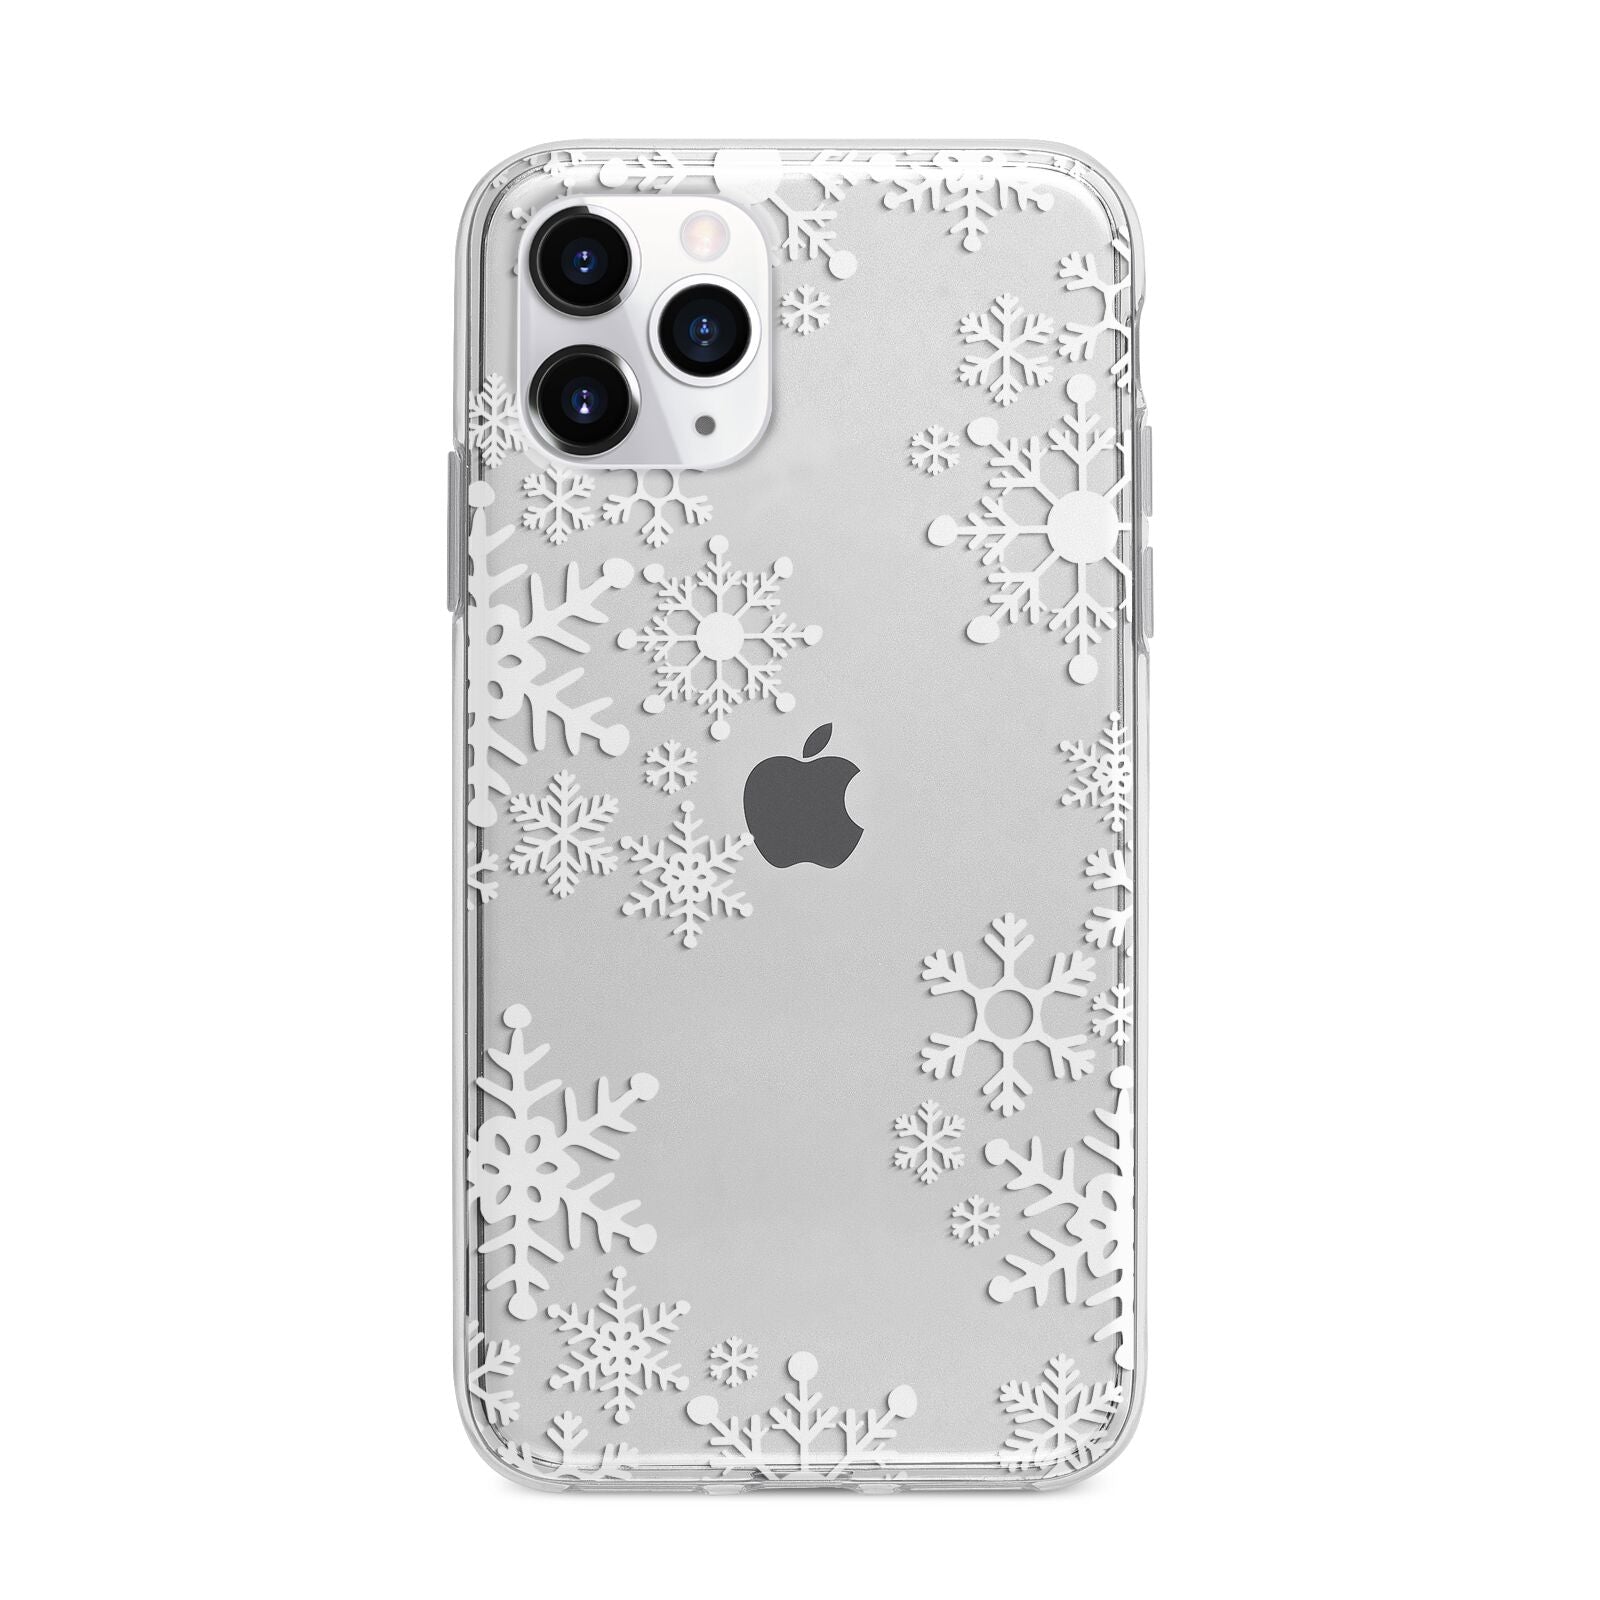 Snowflake Apple iPhone 11 Pro in Silver with Bumper Case